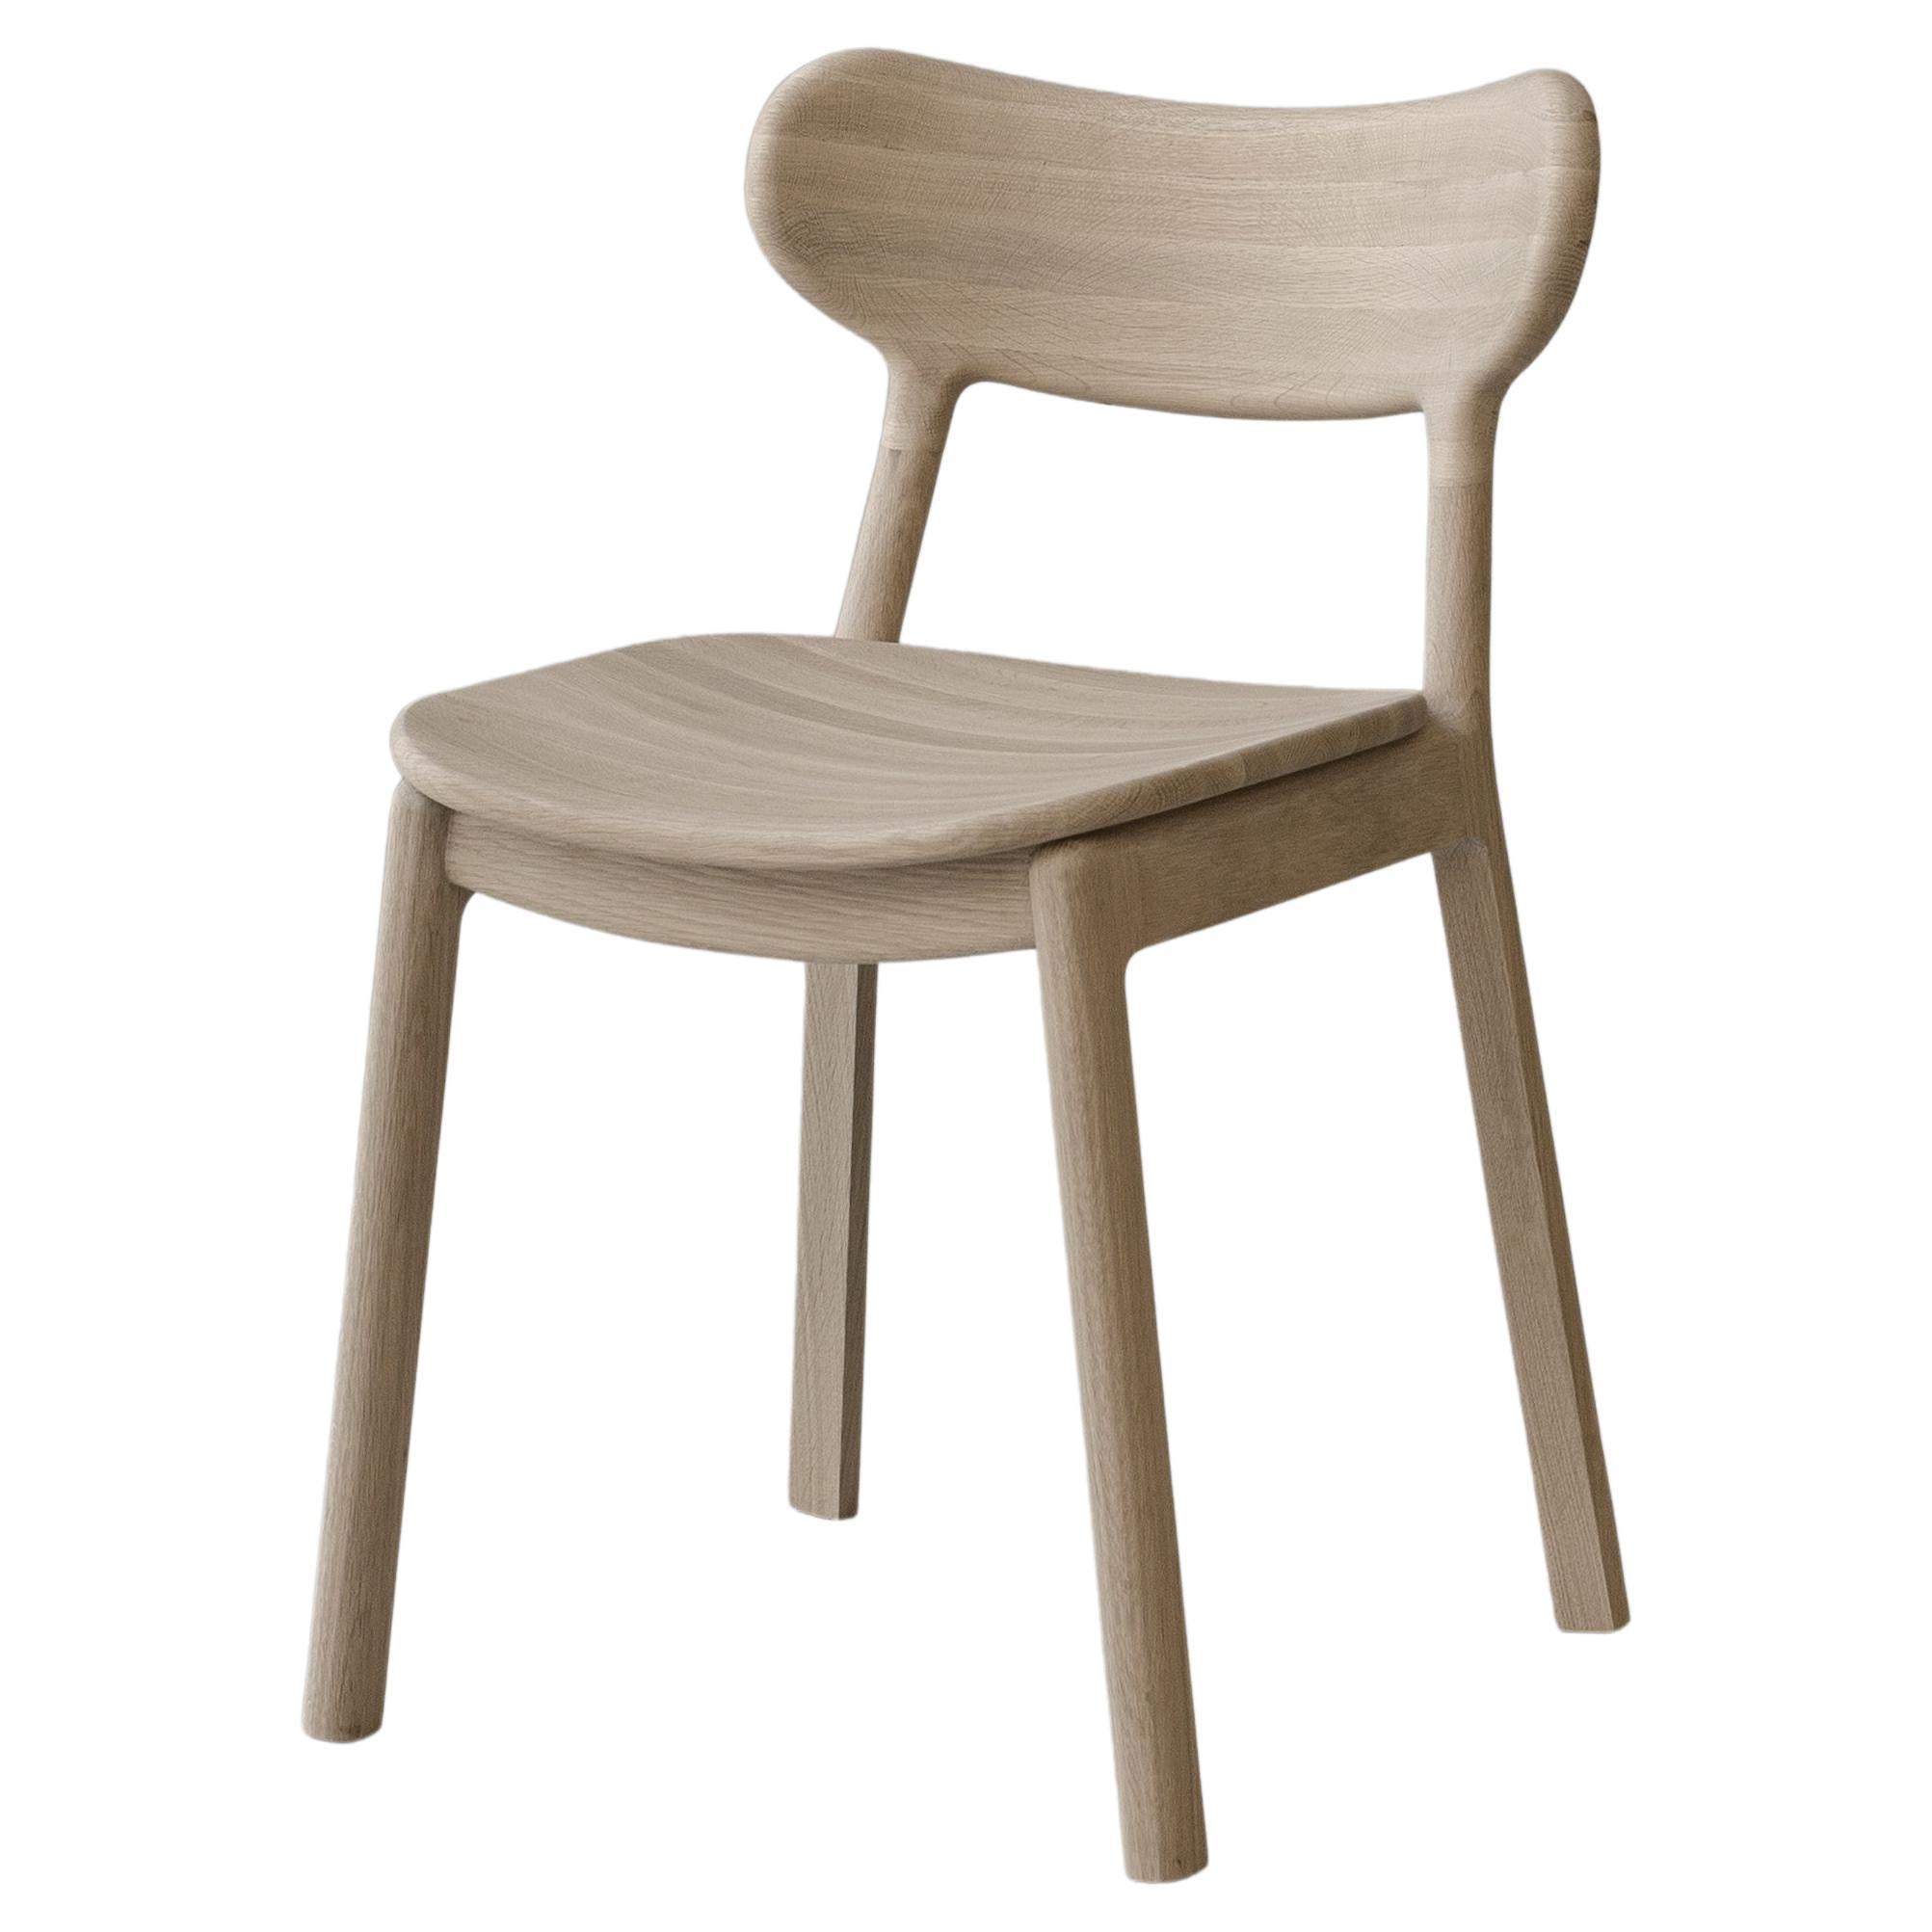 Trasiego Chair For Sale